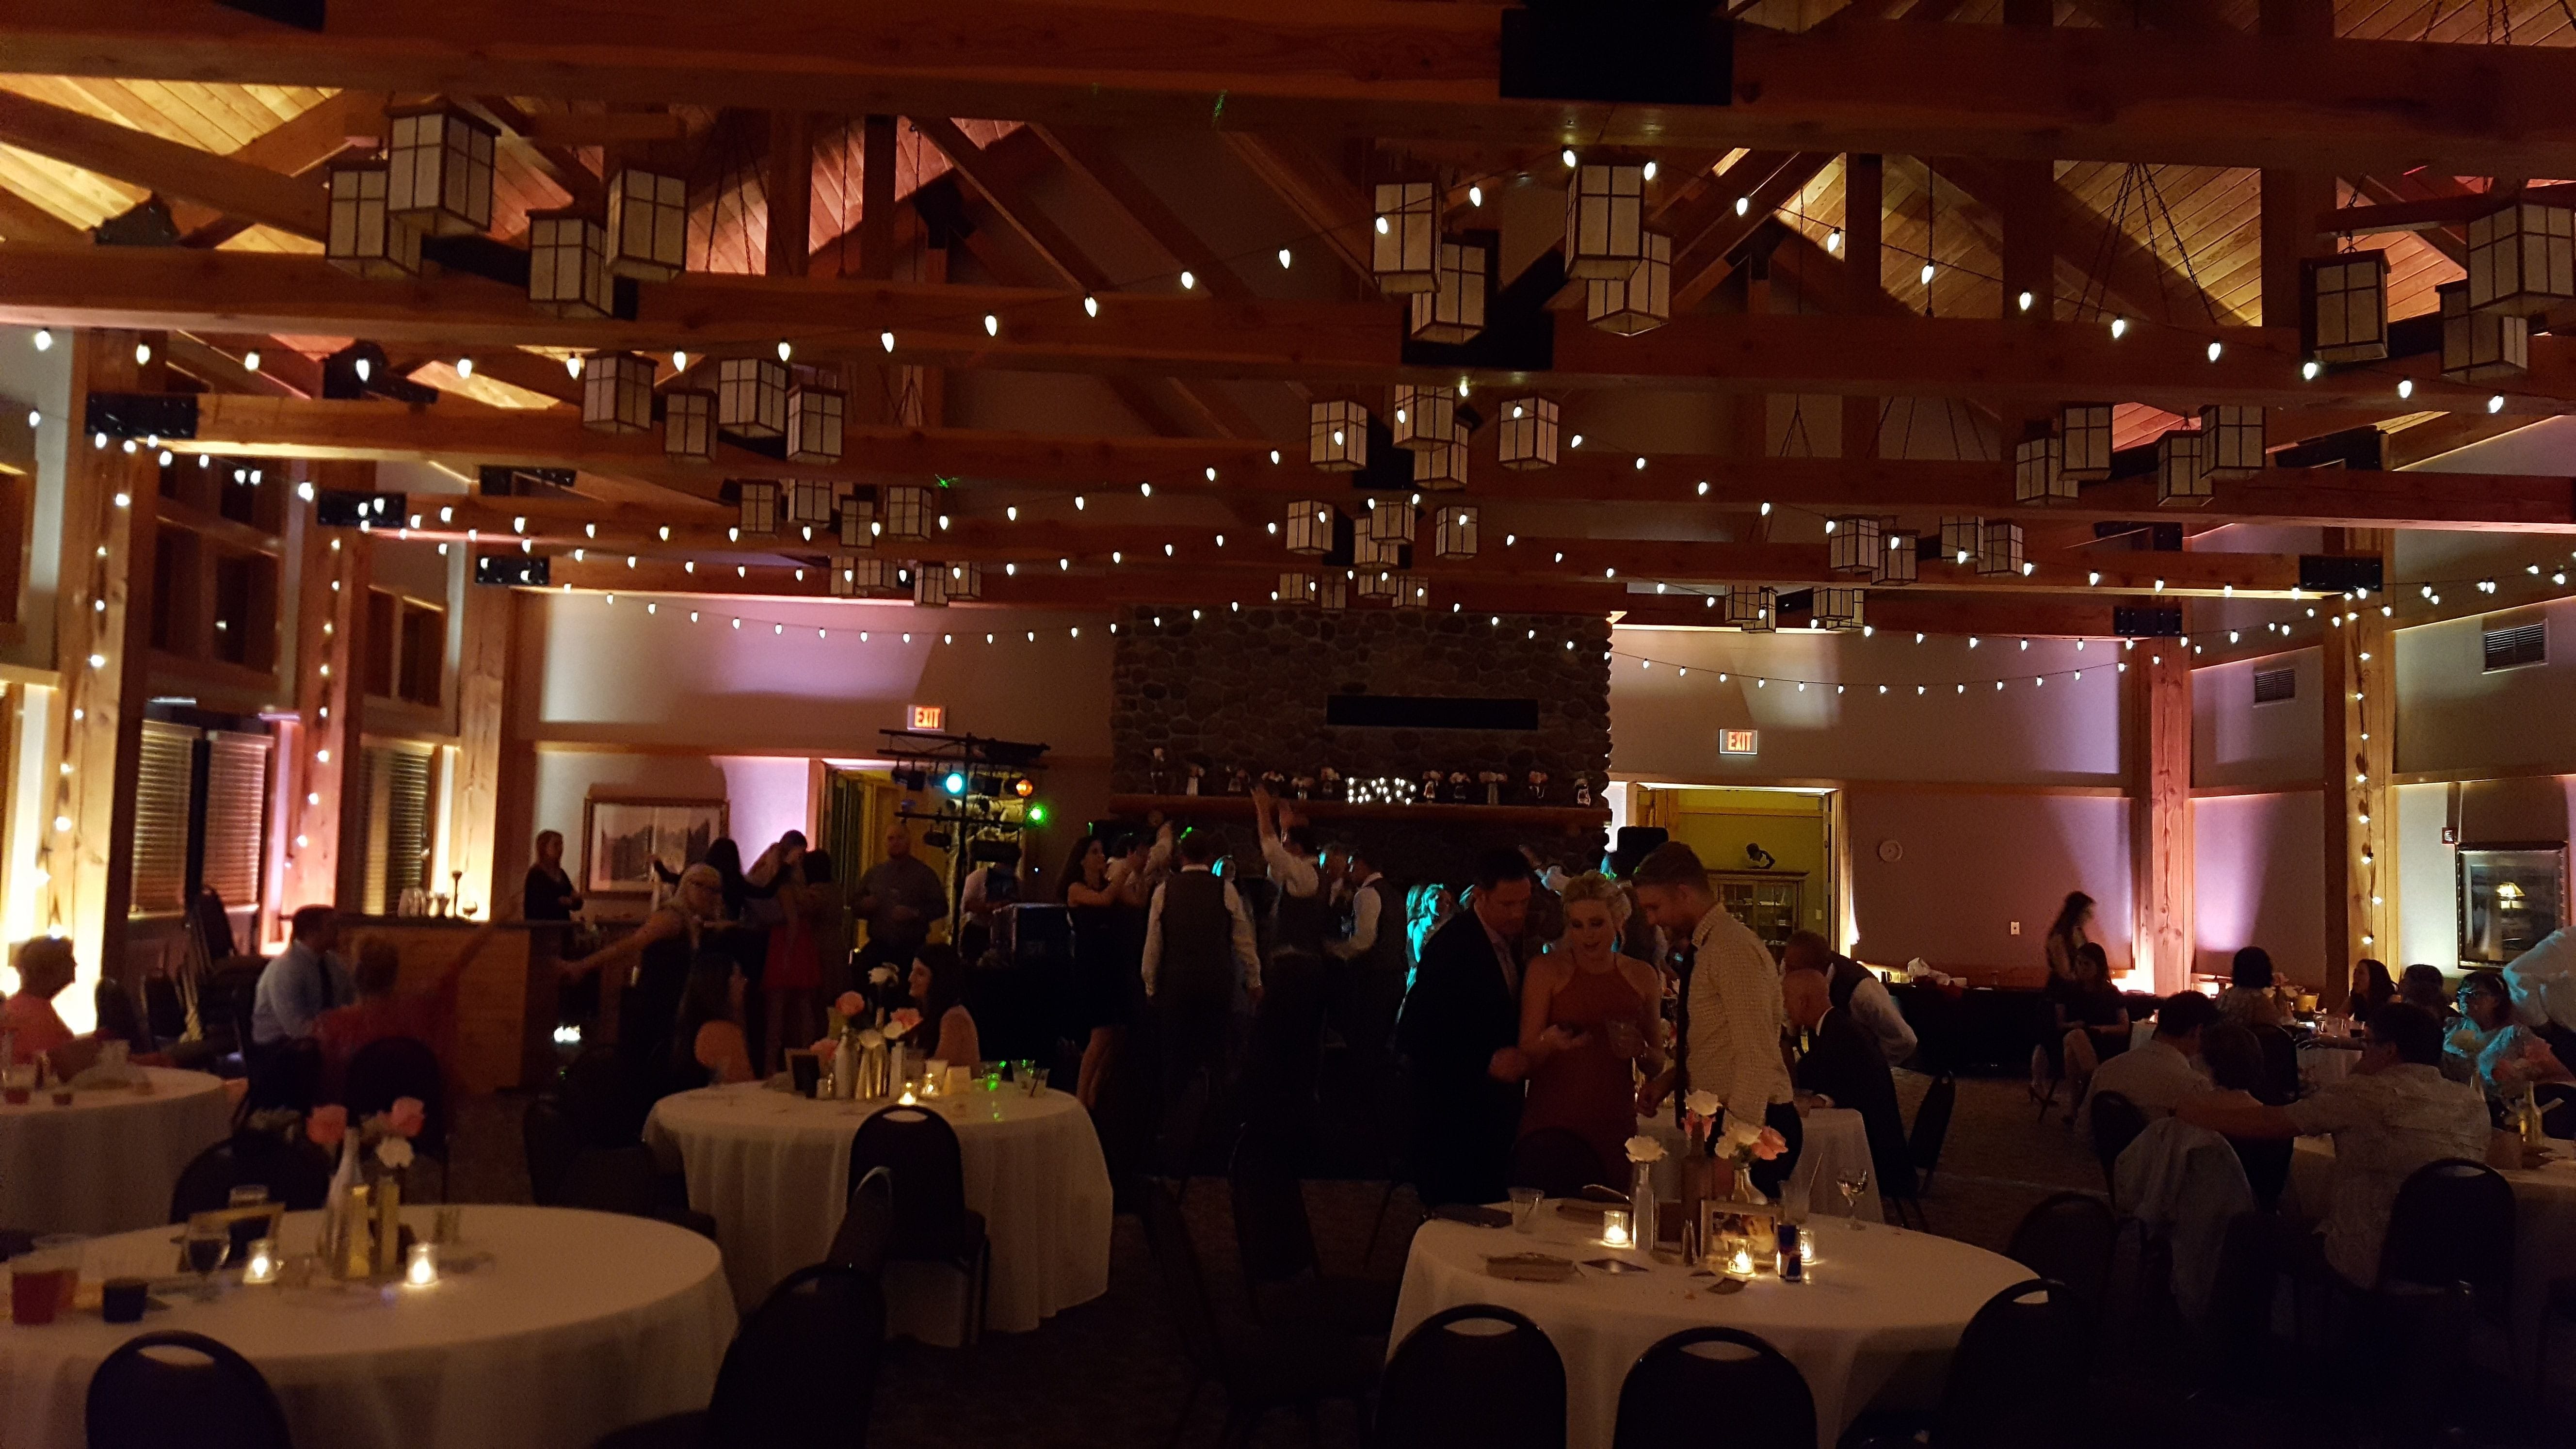 wedding lighting at the Heartwood event center in Trego, WI. Bistro and up lighting provided by Duluth Event Lighting.